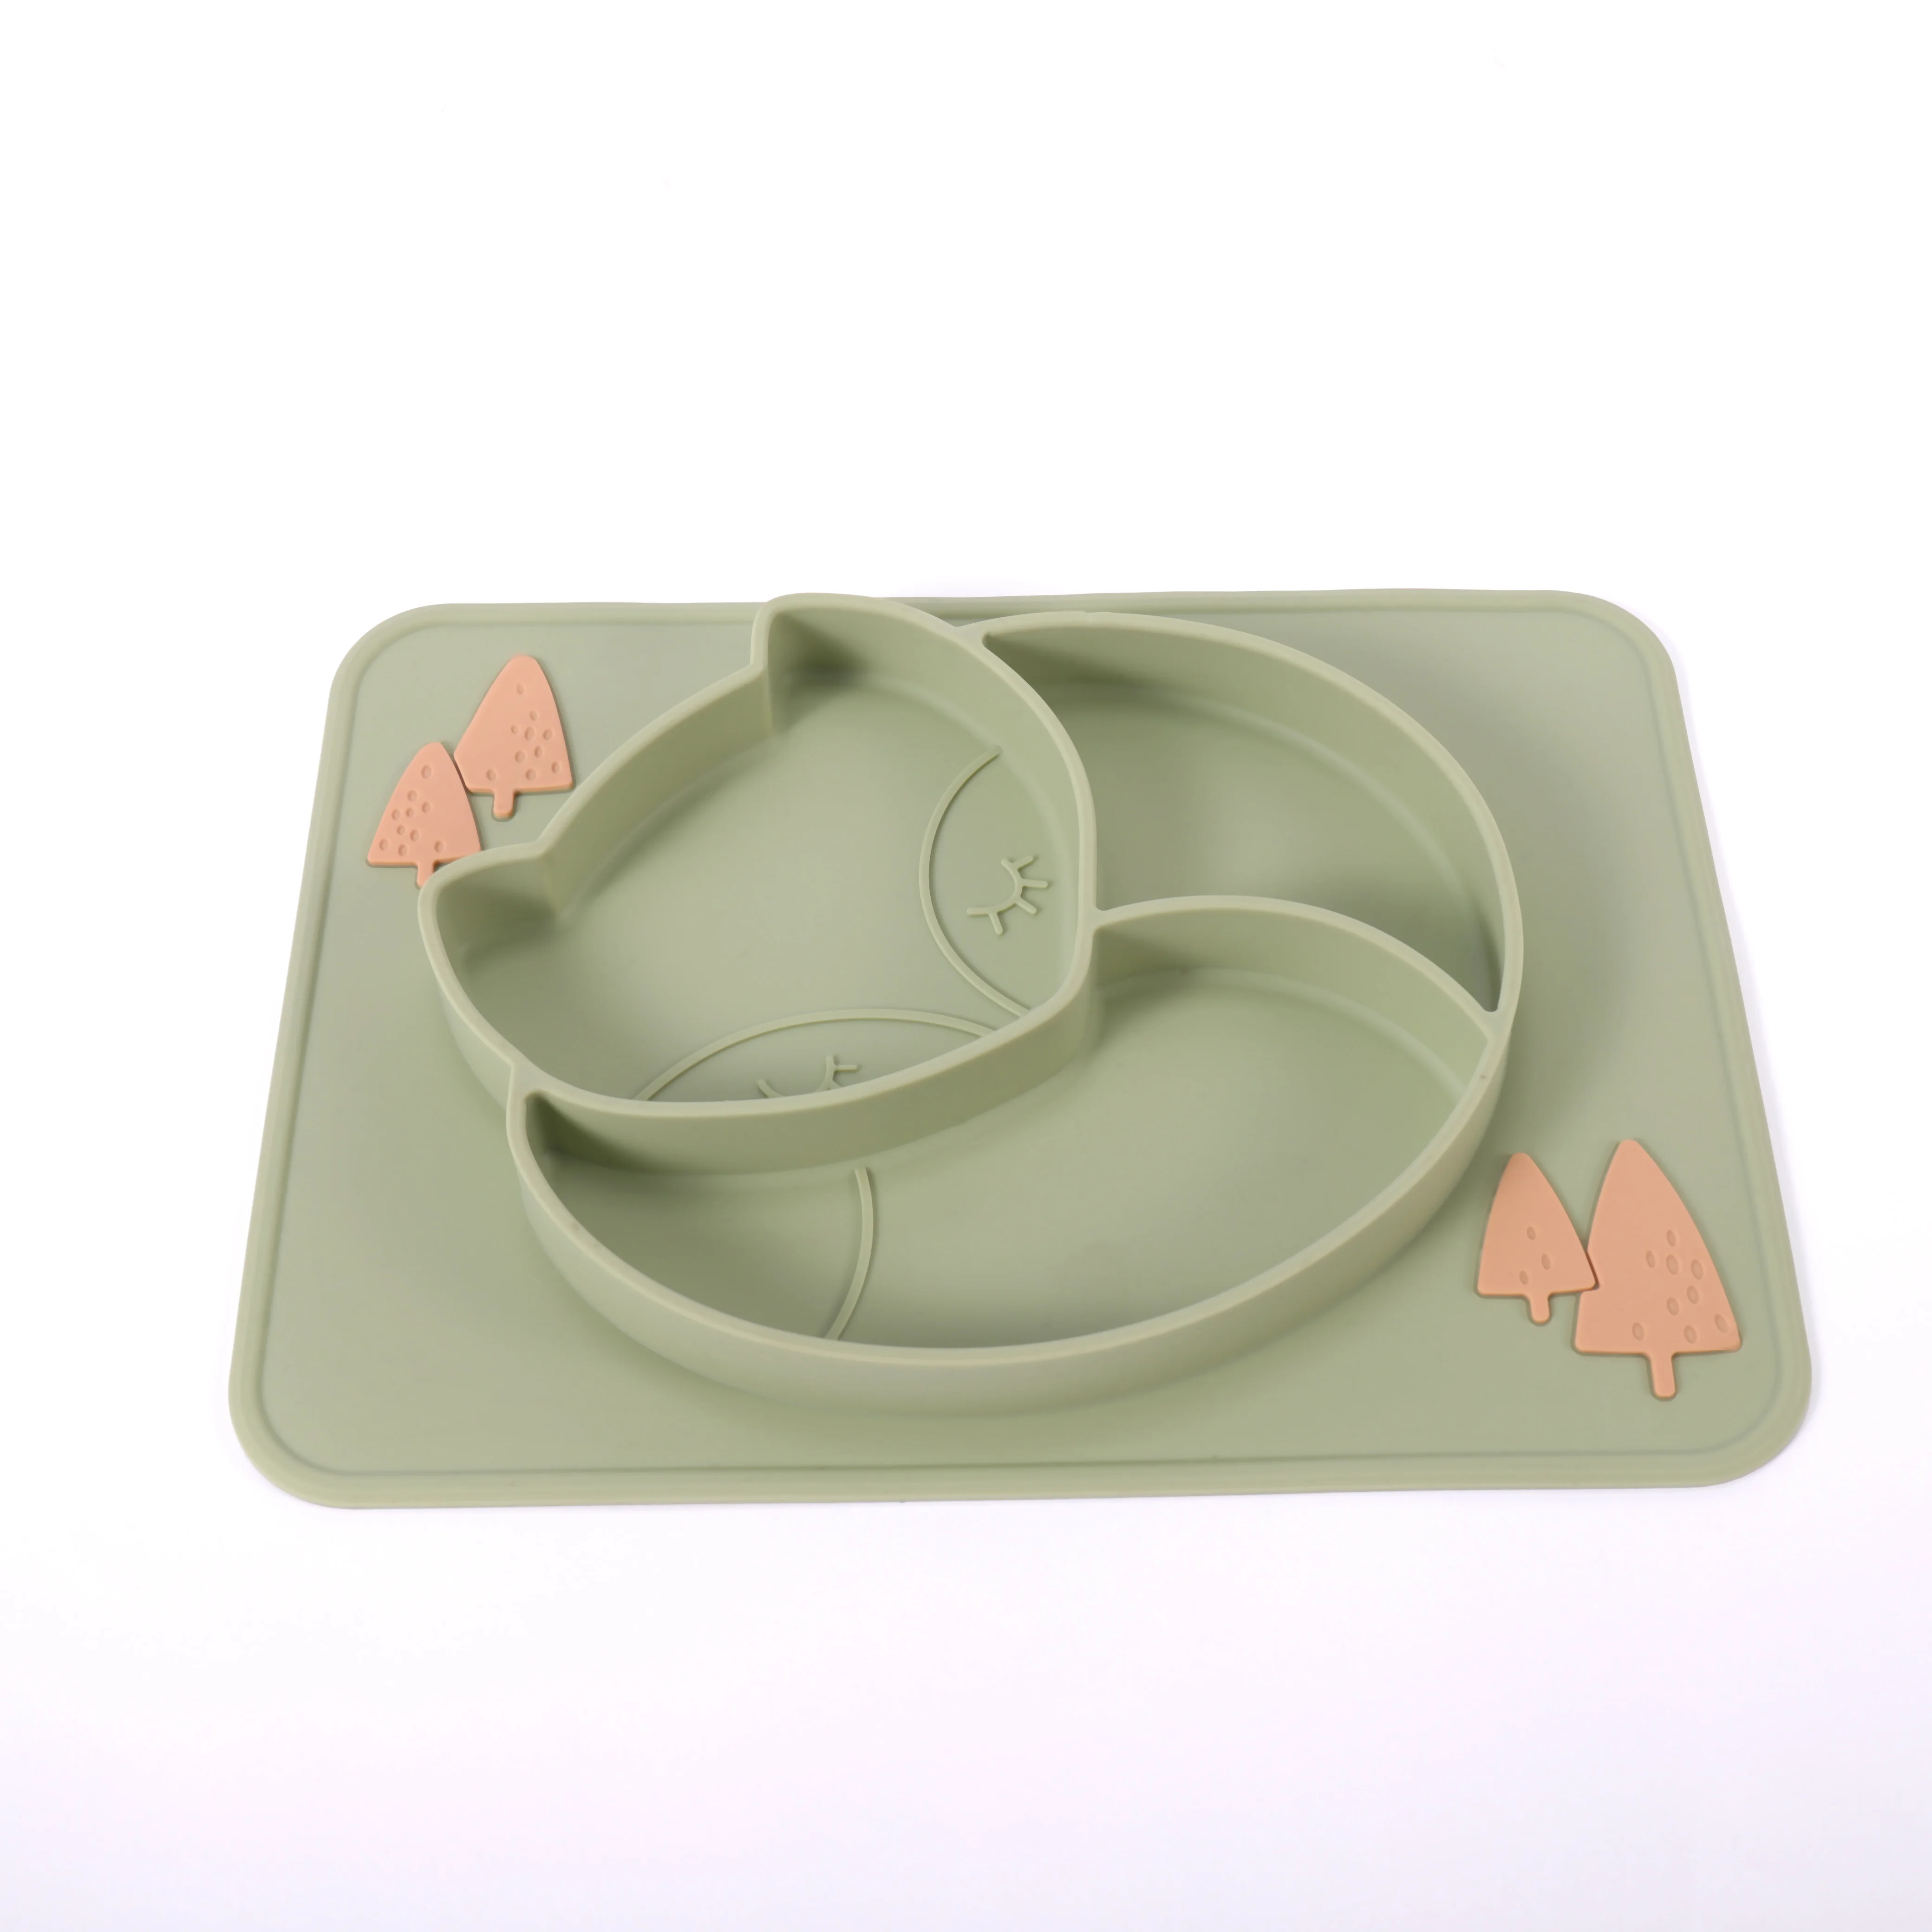 

Toddler Plates with Suction-Baby Plates-100% Silicone Divided Plate-BPA Free-Microwave Safe Dishes, As pic or customized